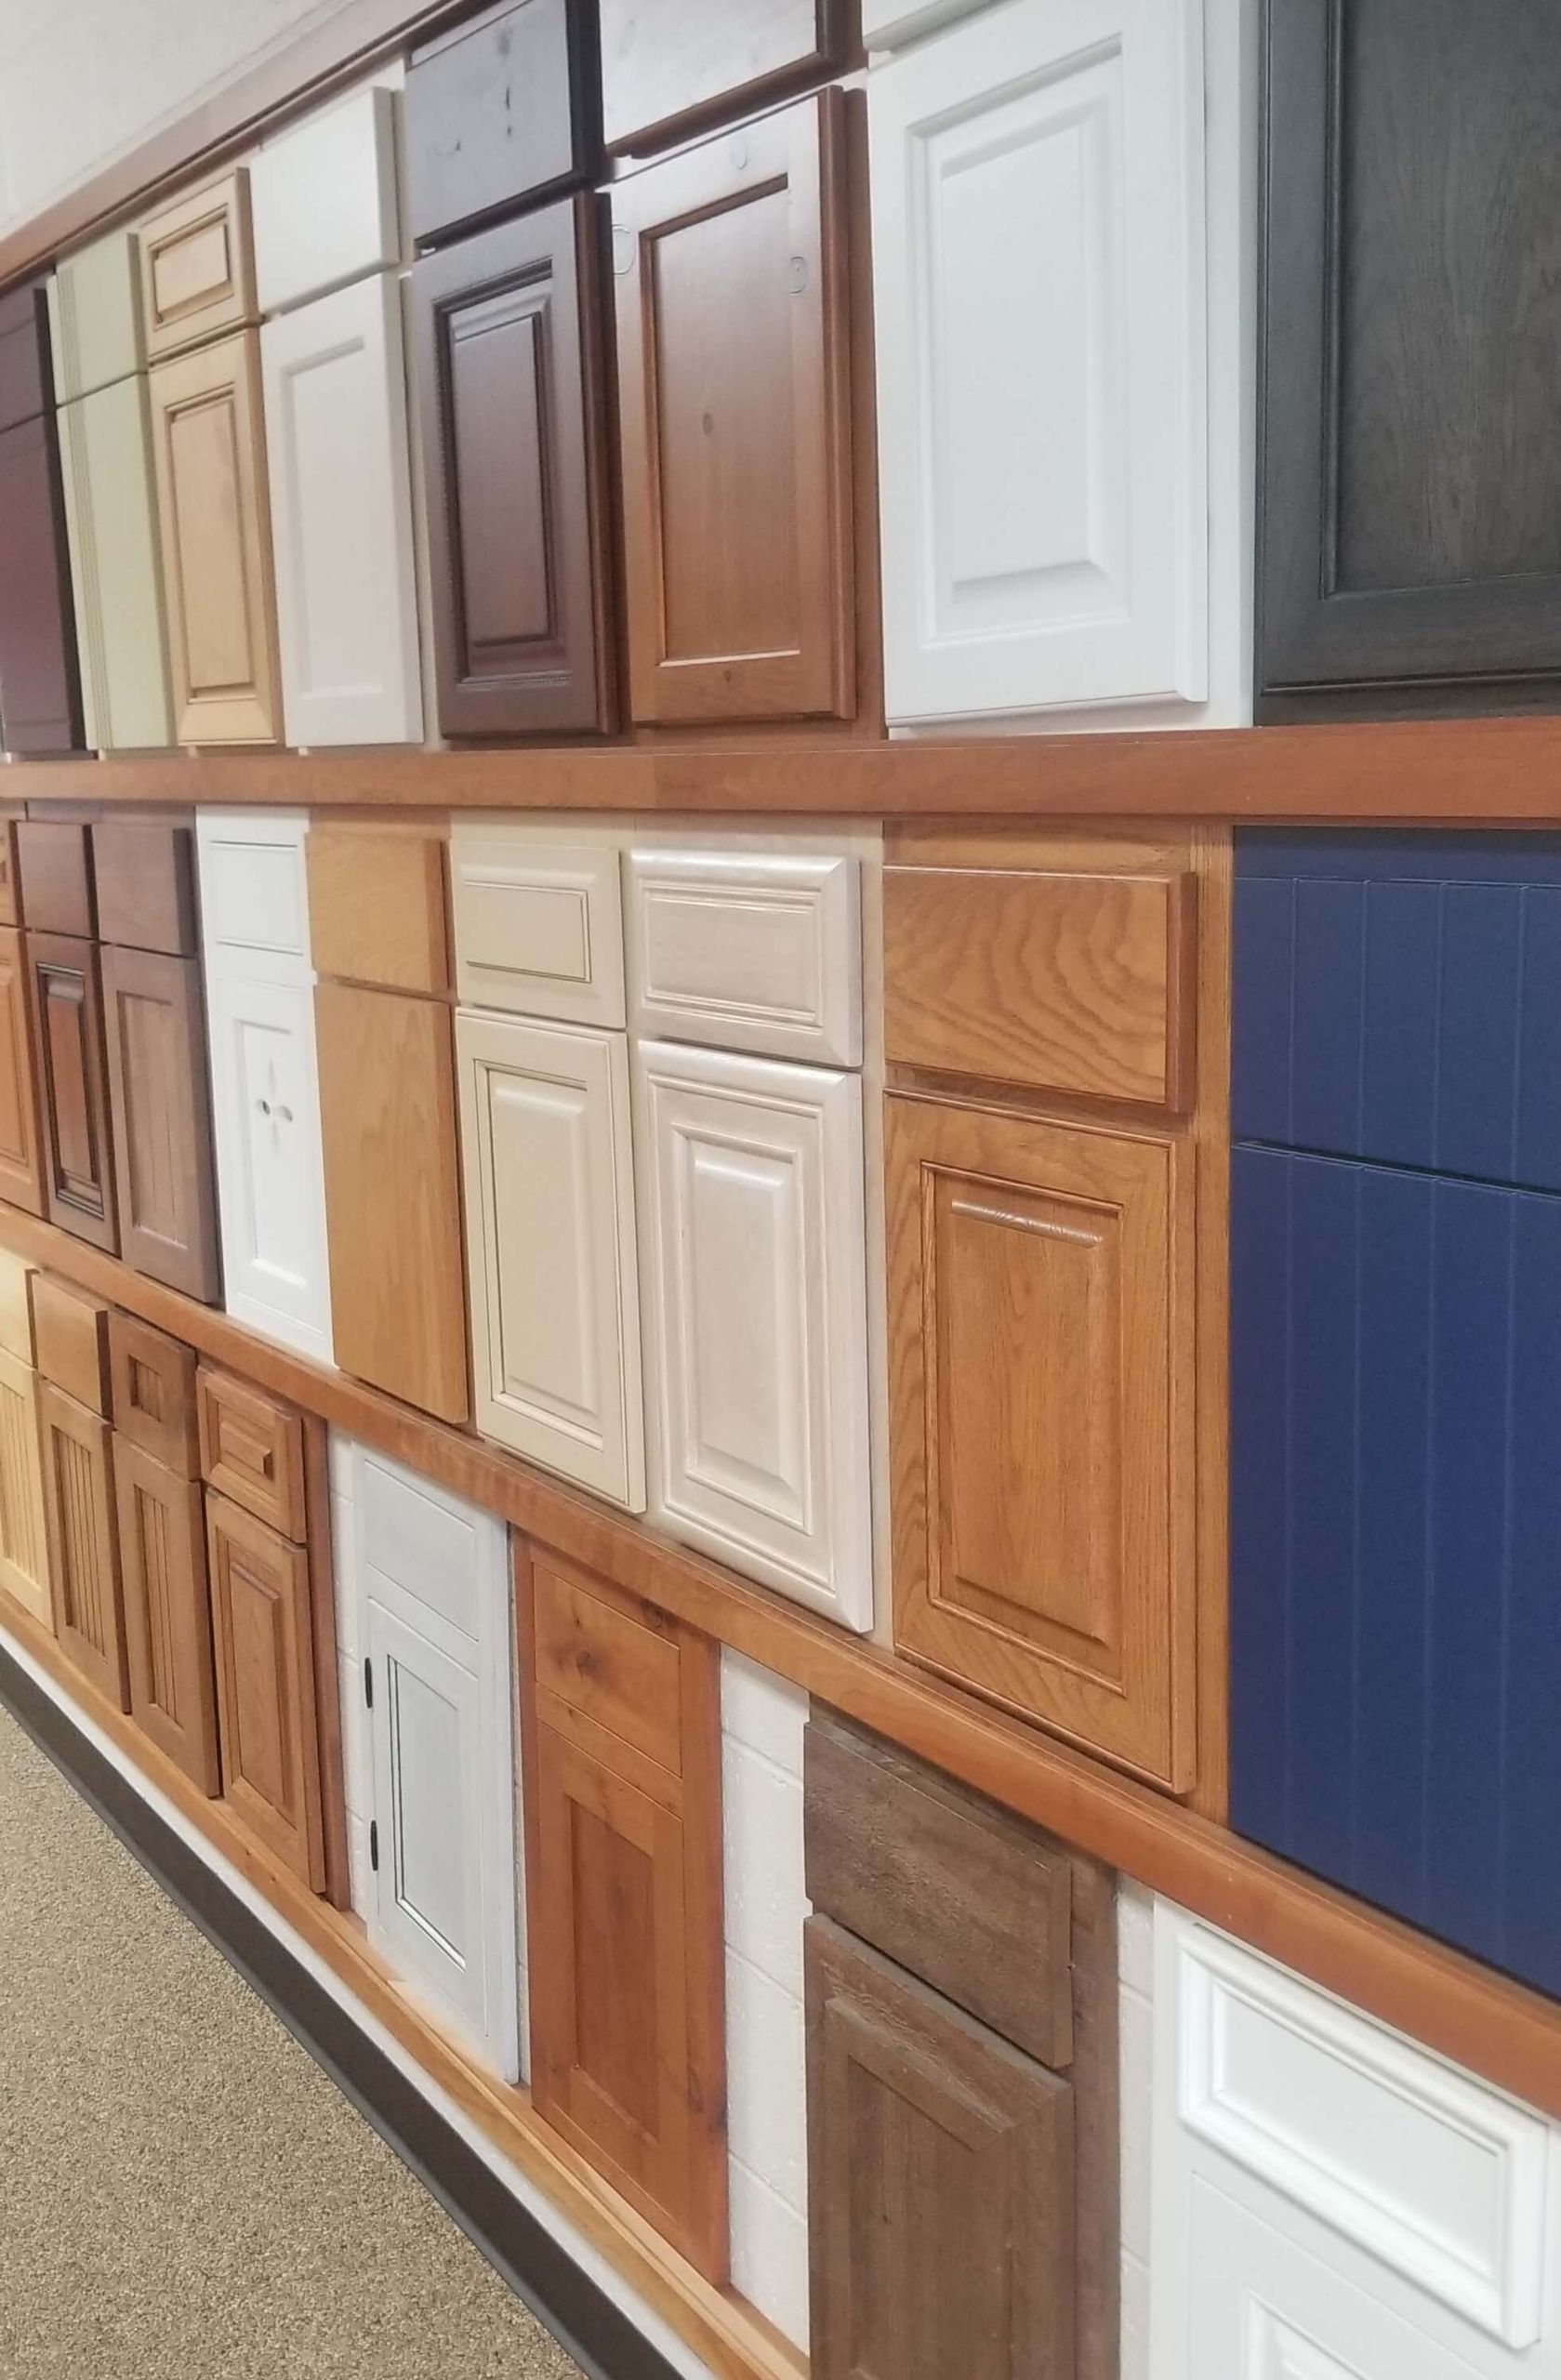 Dombeck Custom Cabinets - High Quality Cabinets